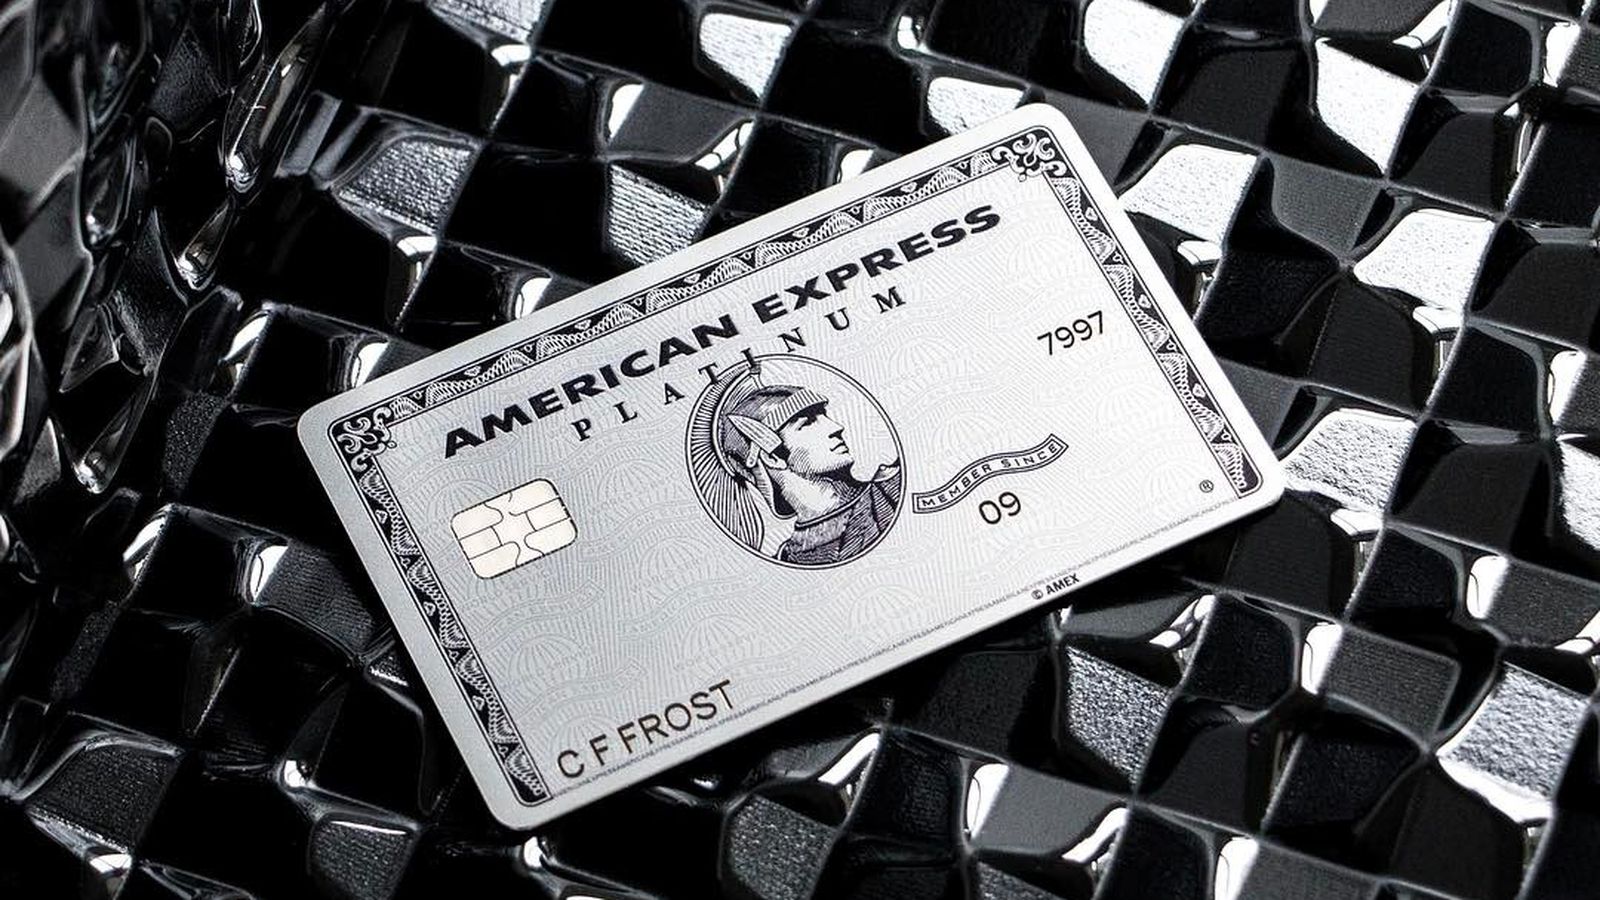 Amex Platinum cardholders will get 200 in free Uber rides every year